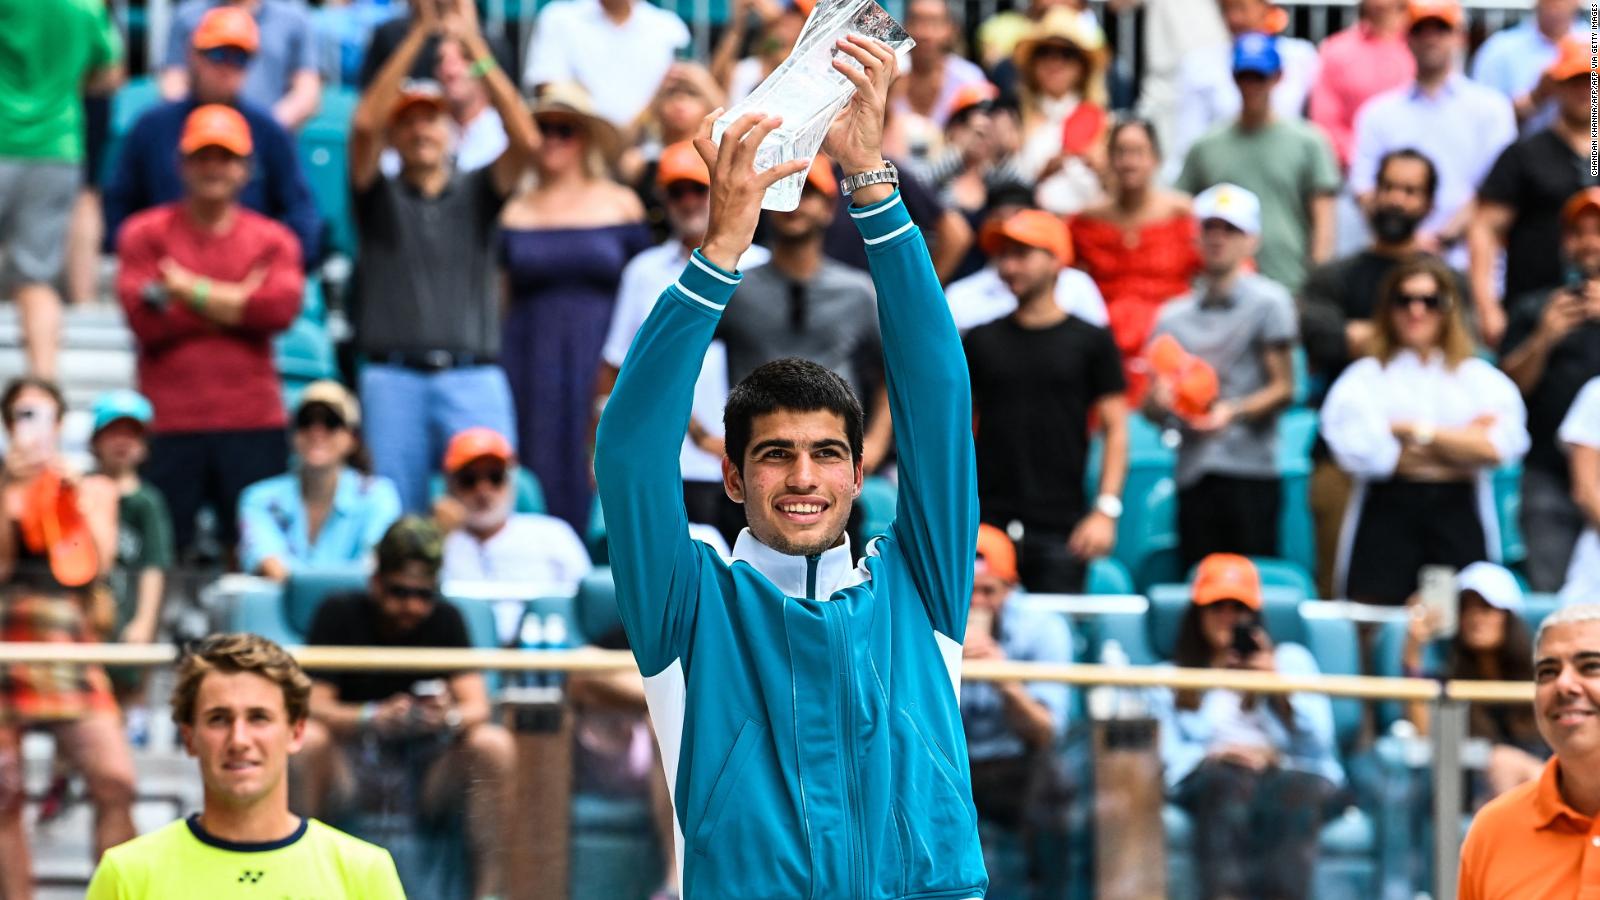 Carlos Alcaraz tells us about his goals after winning the Miami Open